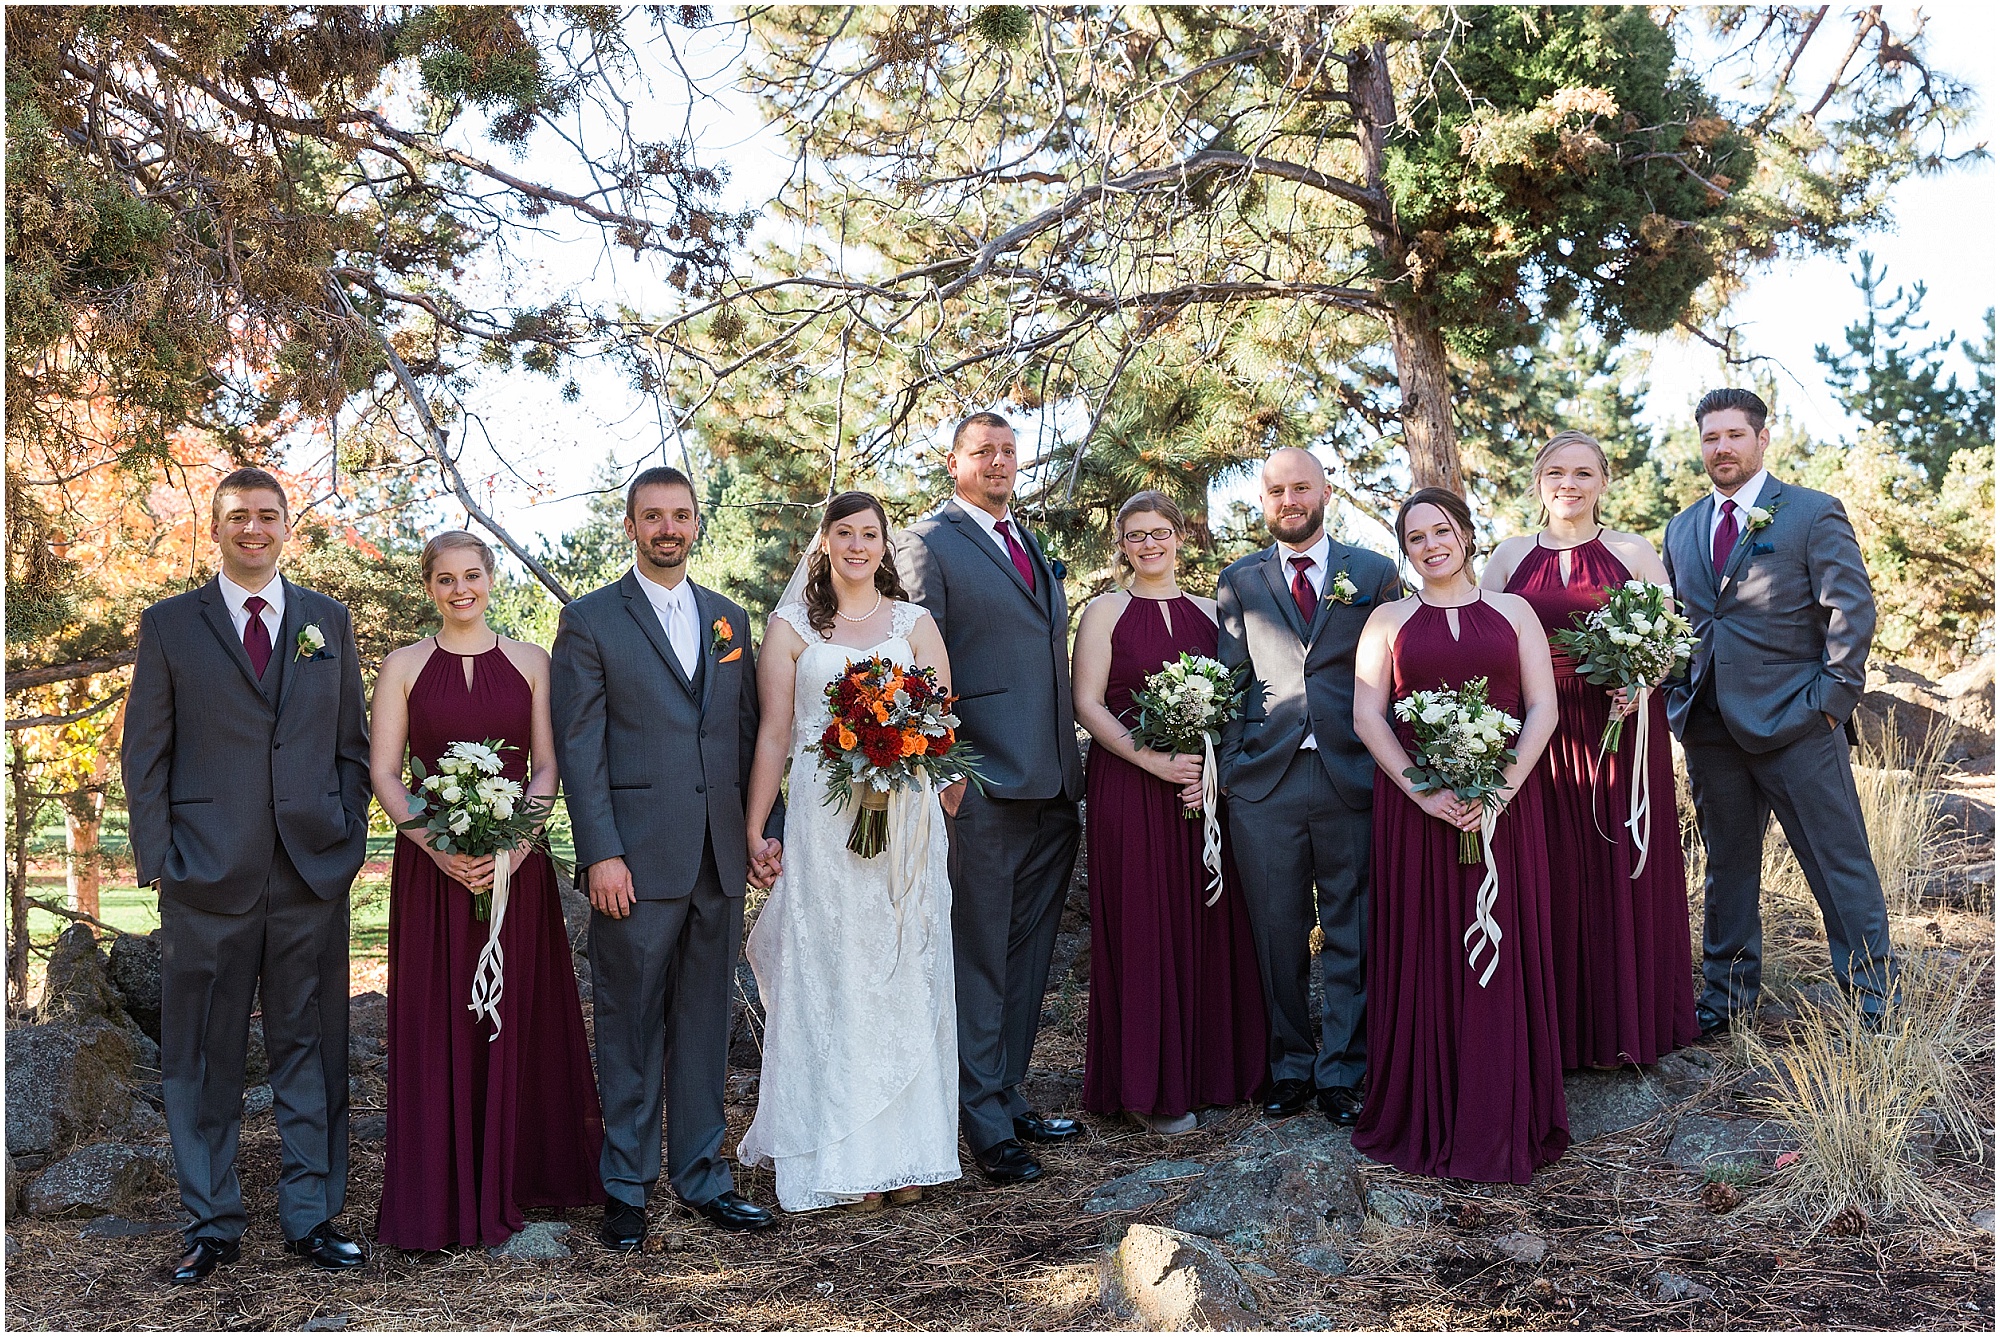 A gorgeous wedding party, wearing navy and maroon, pose for formal portraits at this outdoor Bend Oregon wedding at Hollinshead Park. | Erica Swantek Photography